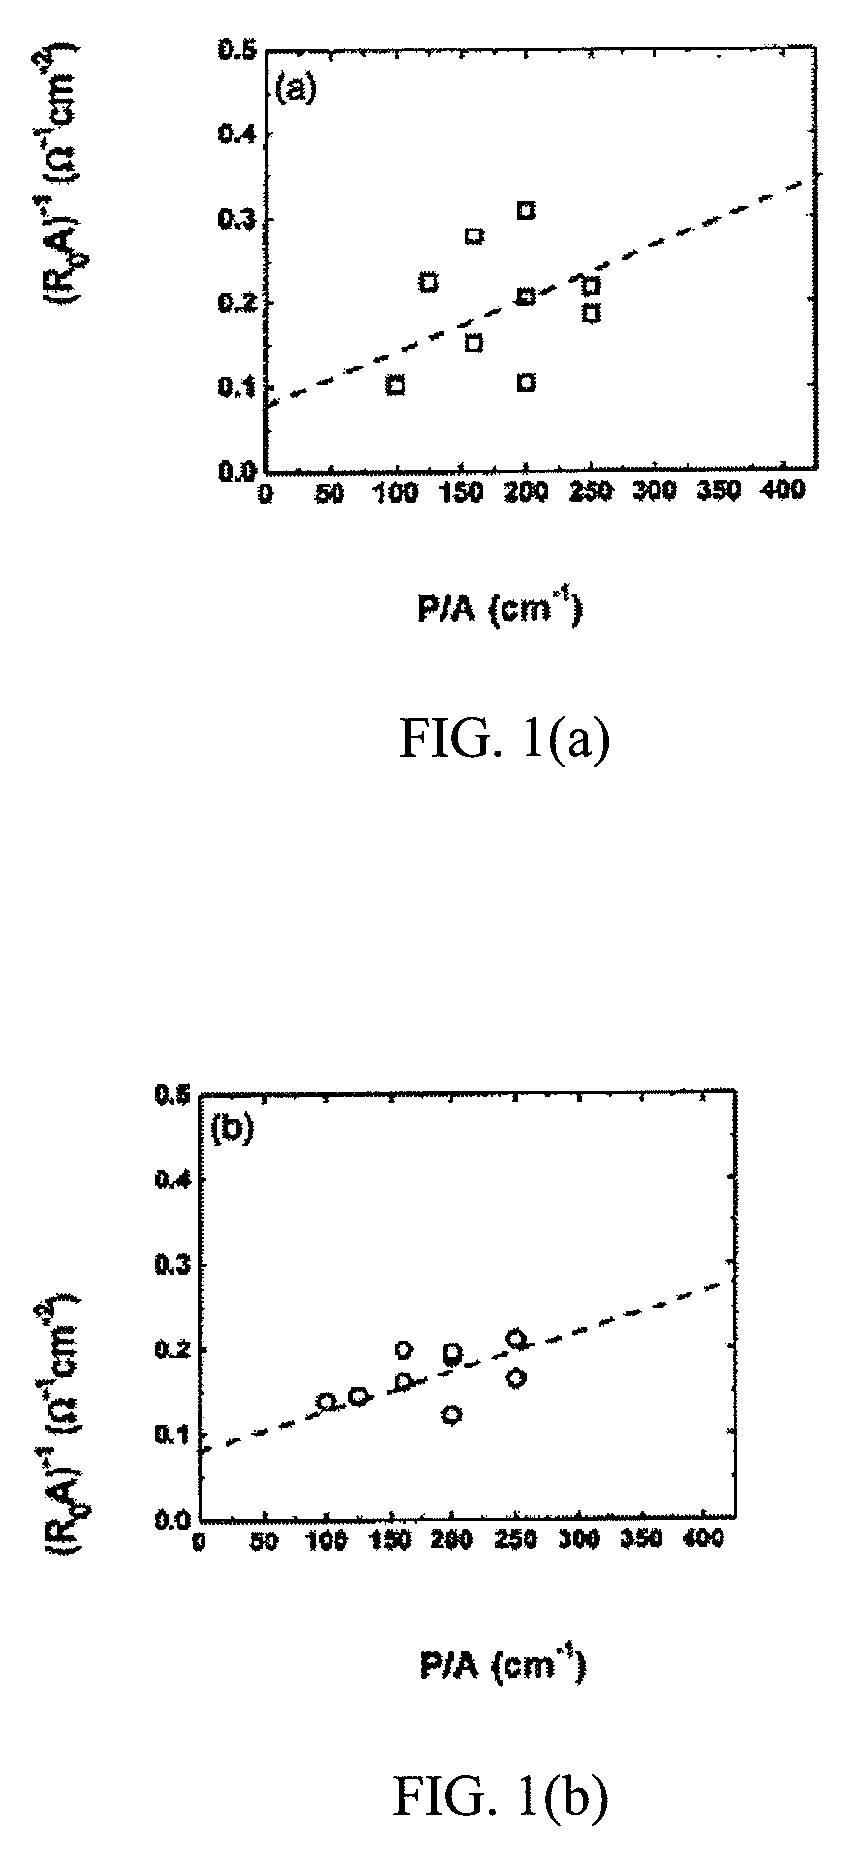 Superlattice photodiodes with polyimide surface passivation